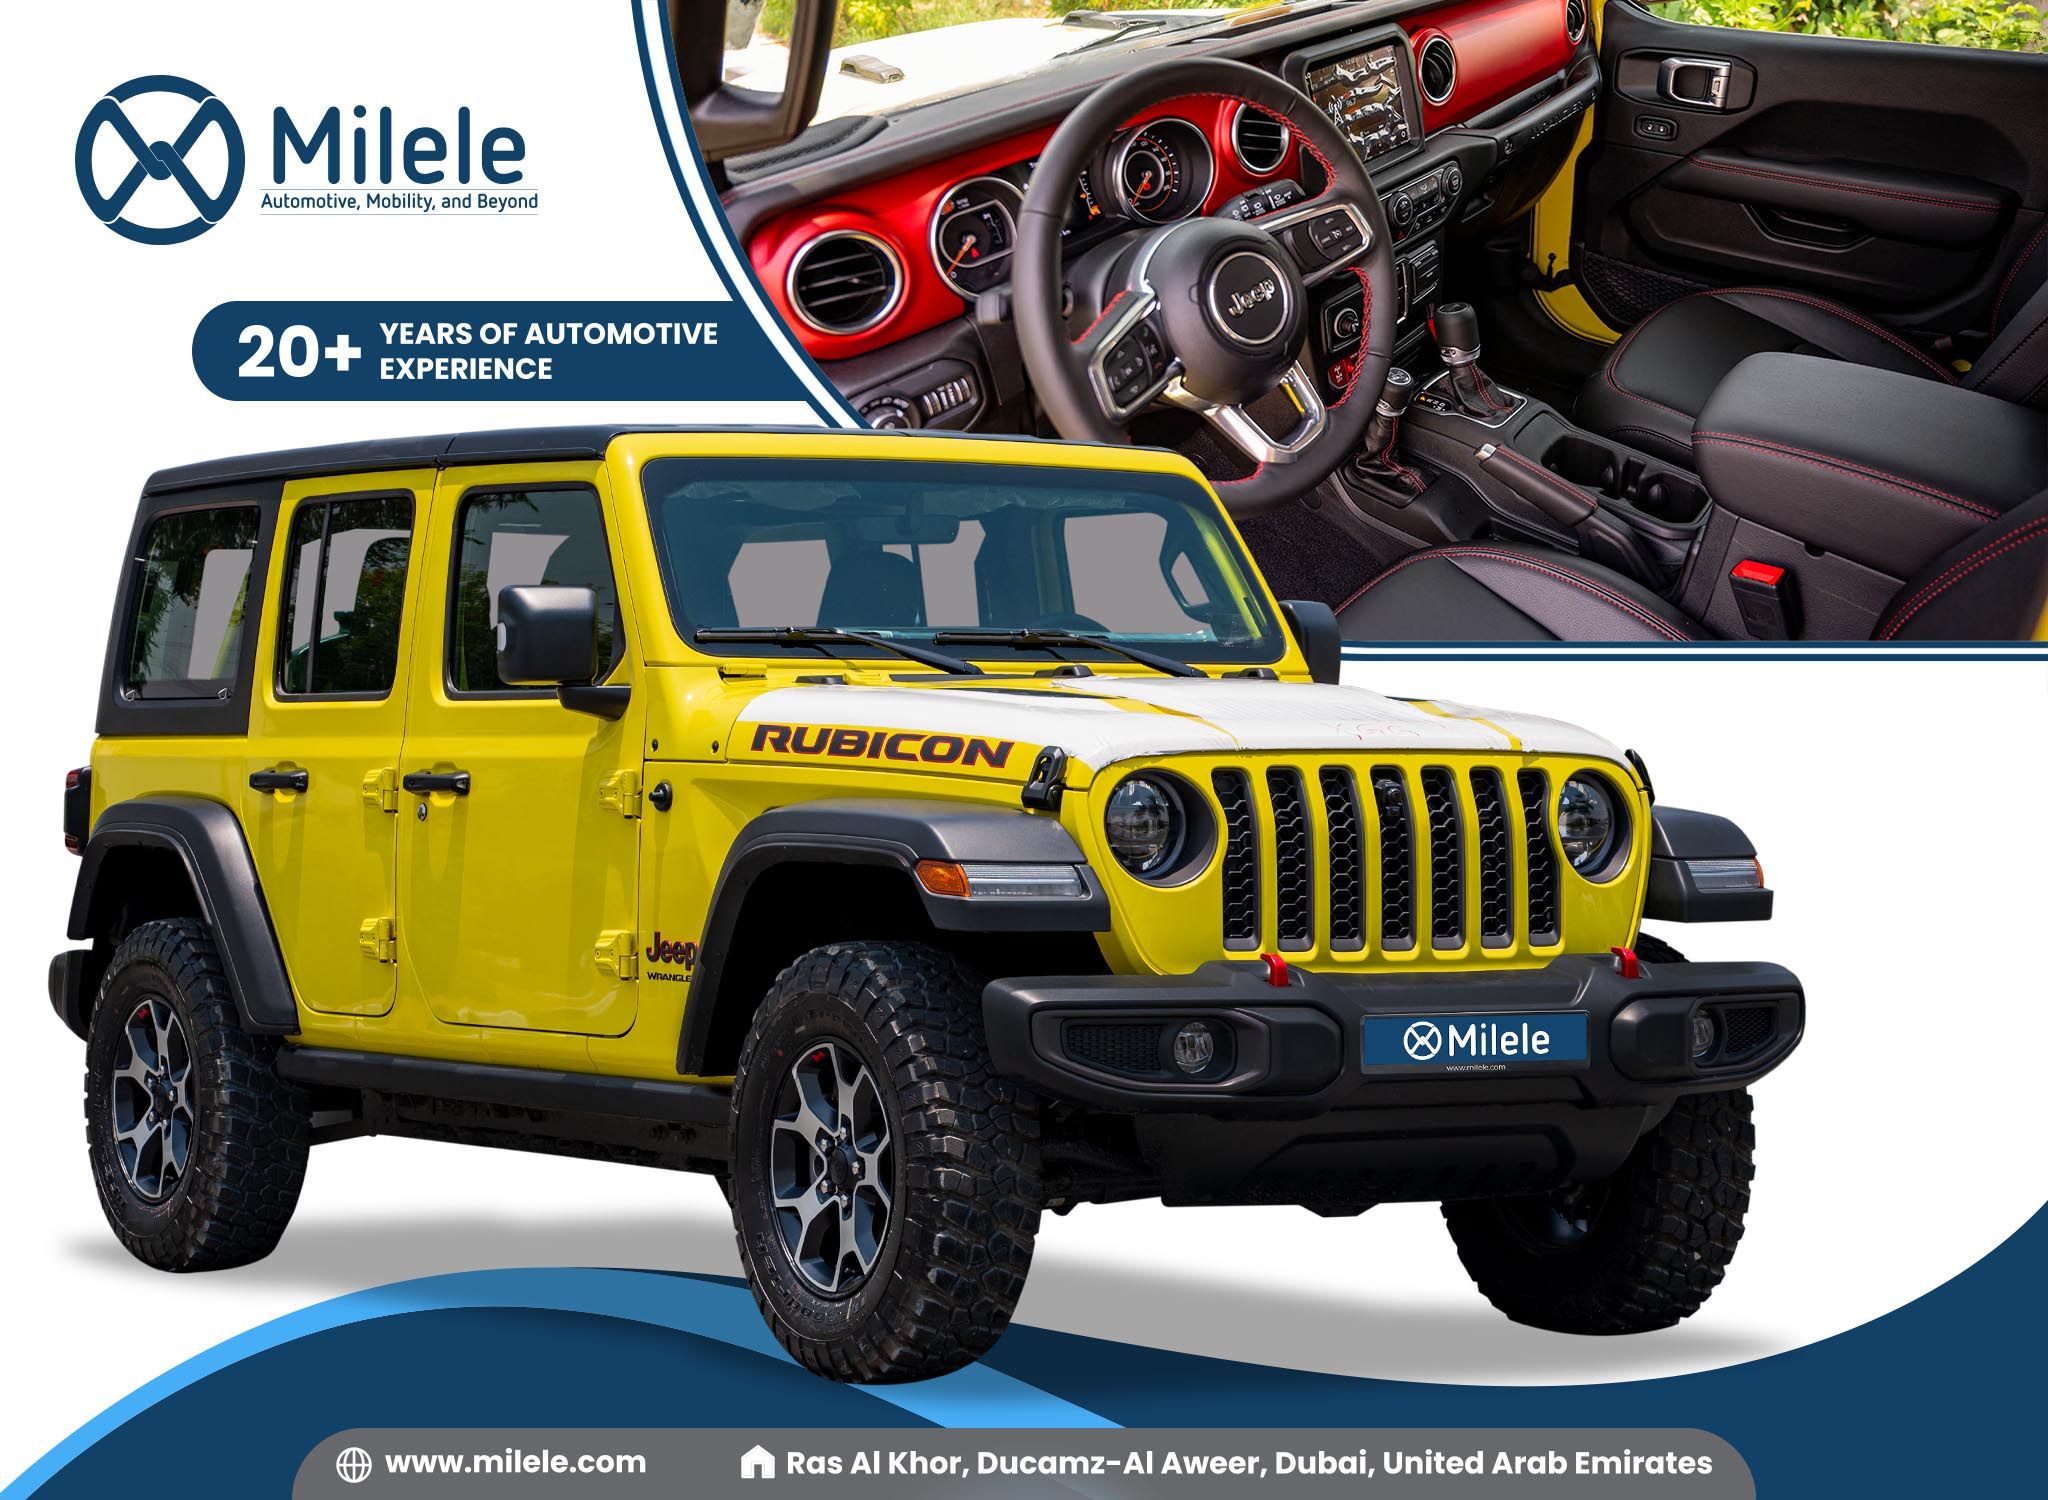 2023 JEEP WRANGLER RUBICON UNLIMITED 2.0L PETROL: KEYLESS ENTRY, OFF-ROAD CAMERA, LEATHER SEATS